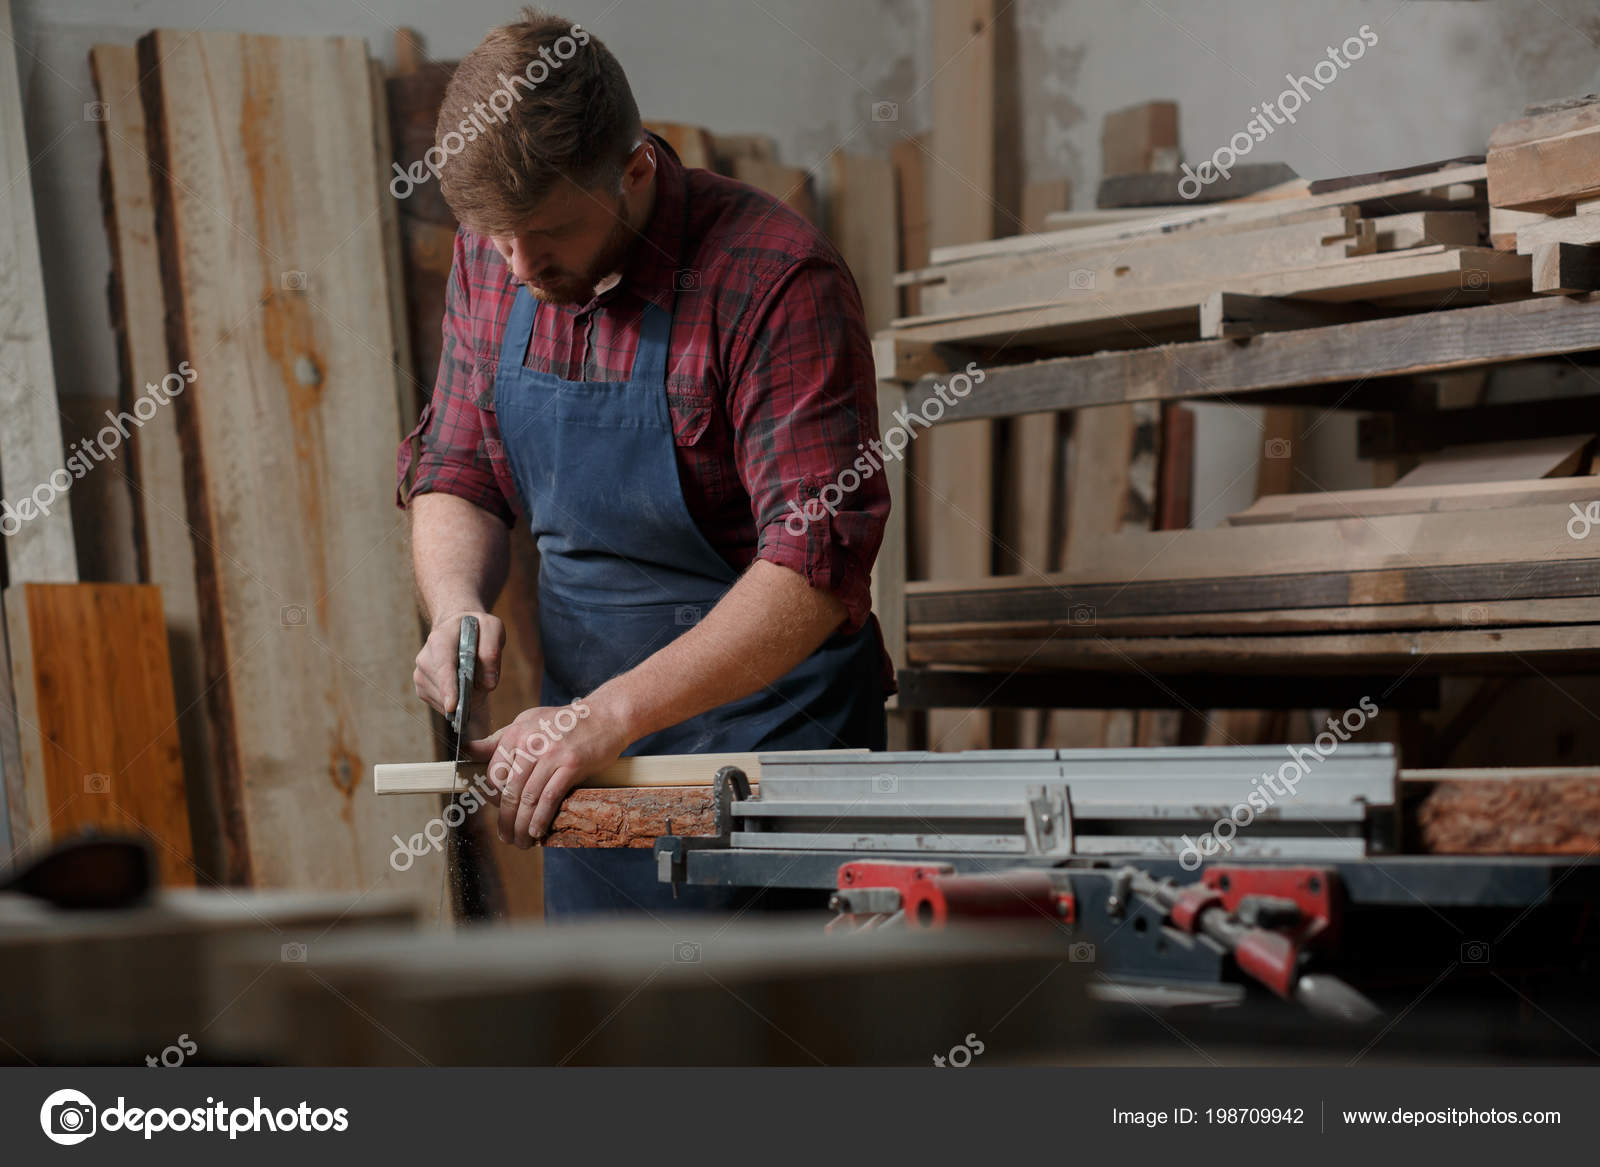 33 492 Woodworker Stock Photos Free Royalty Free Woodworker Images Depositphotos